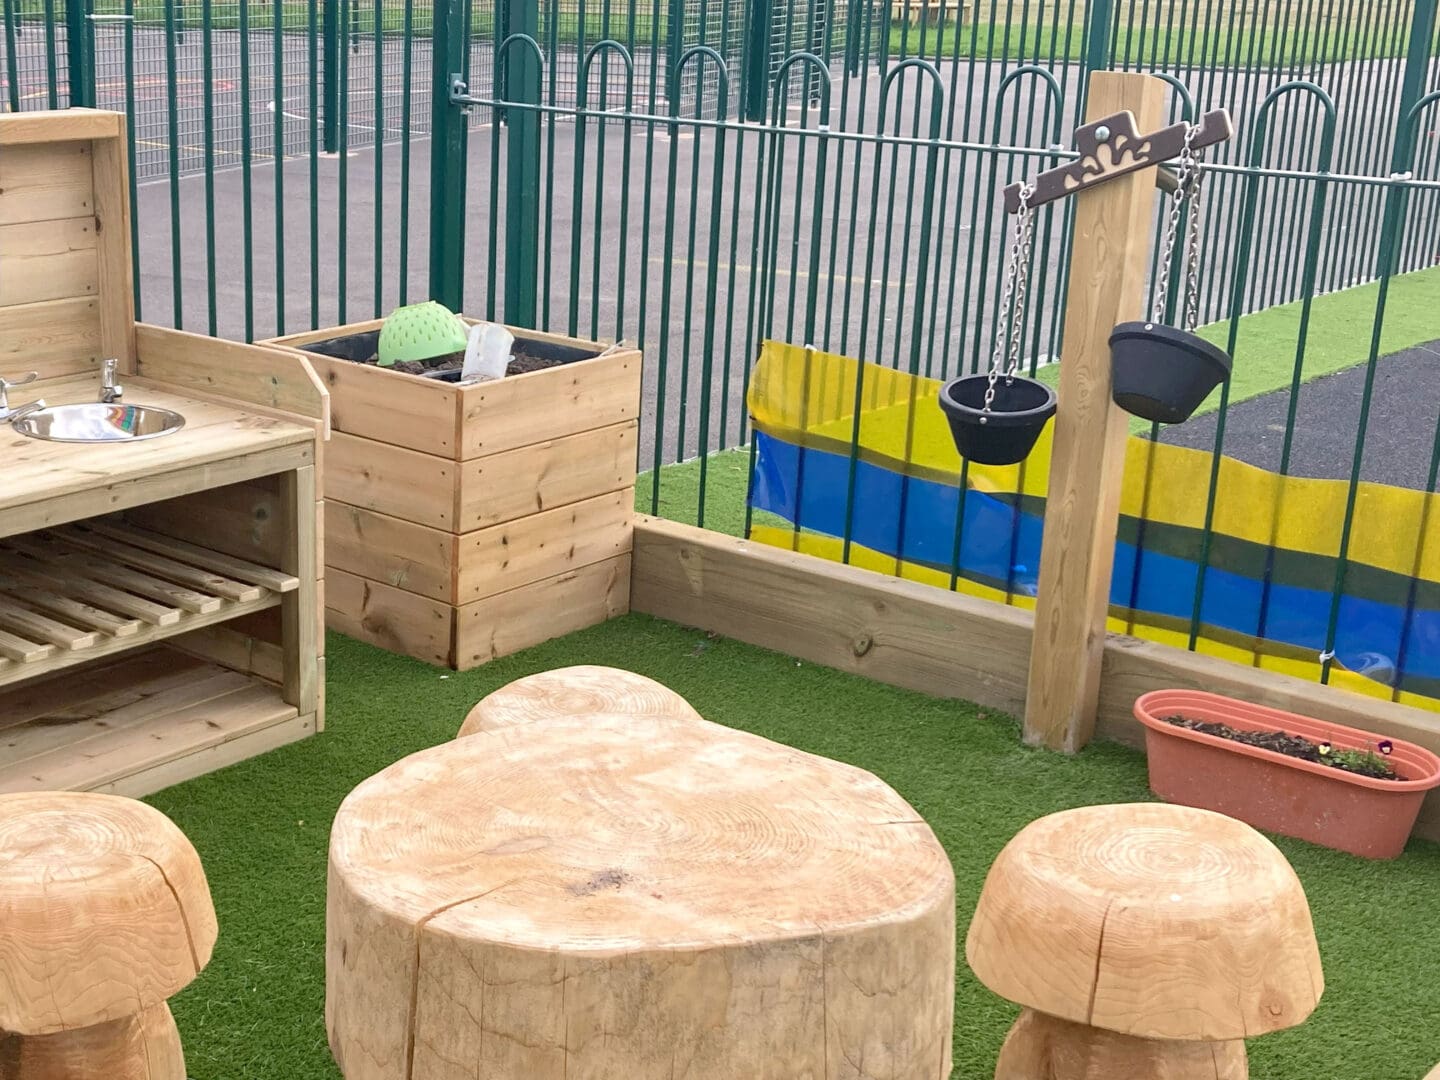 meadowside-primary-messy-play-area-scales